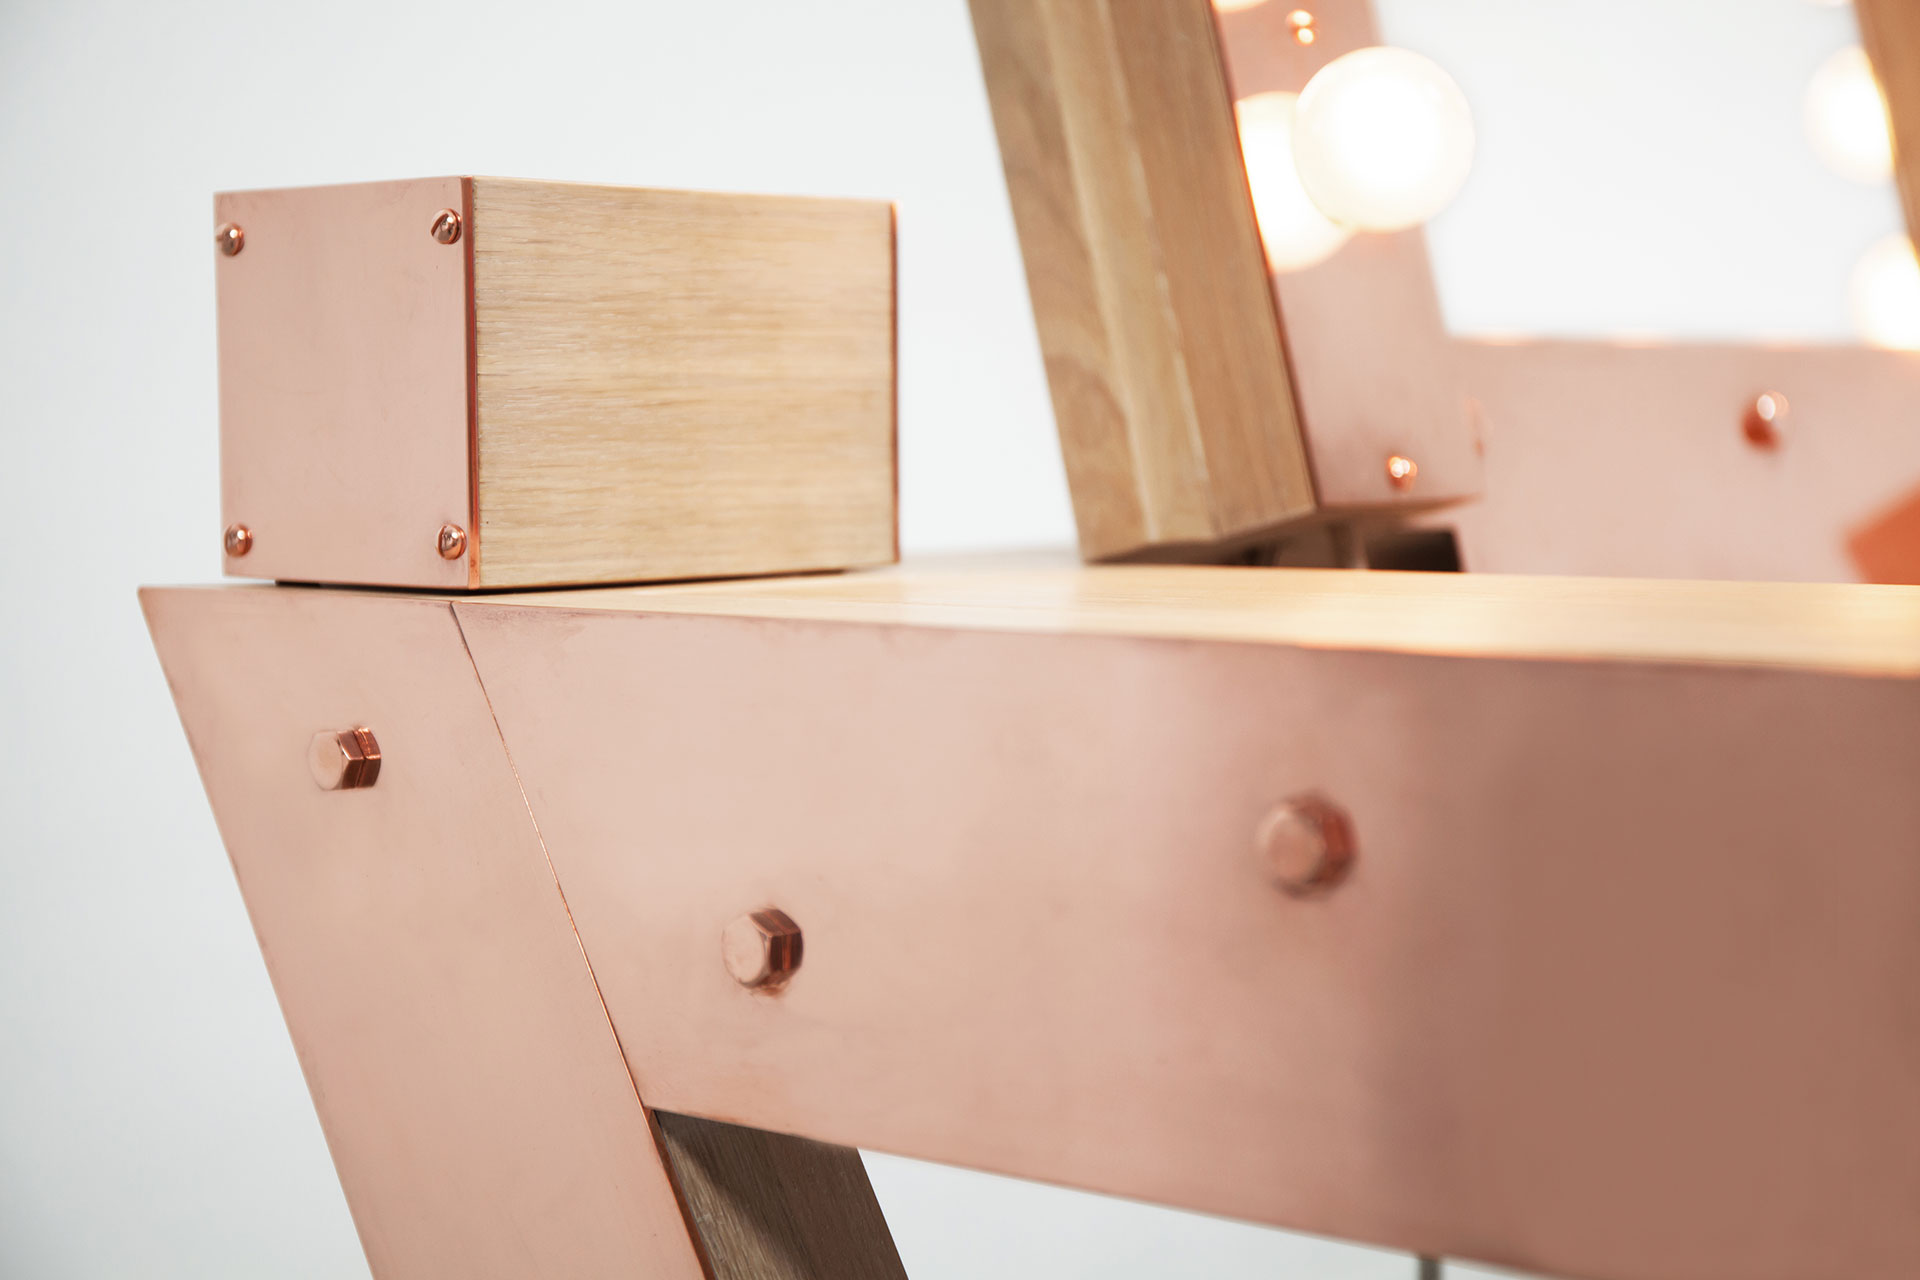 Copper and wood vanity table inspired by loft design